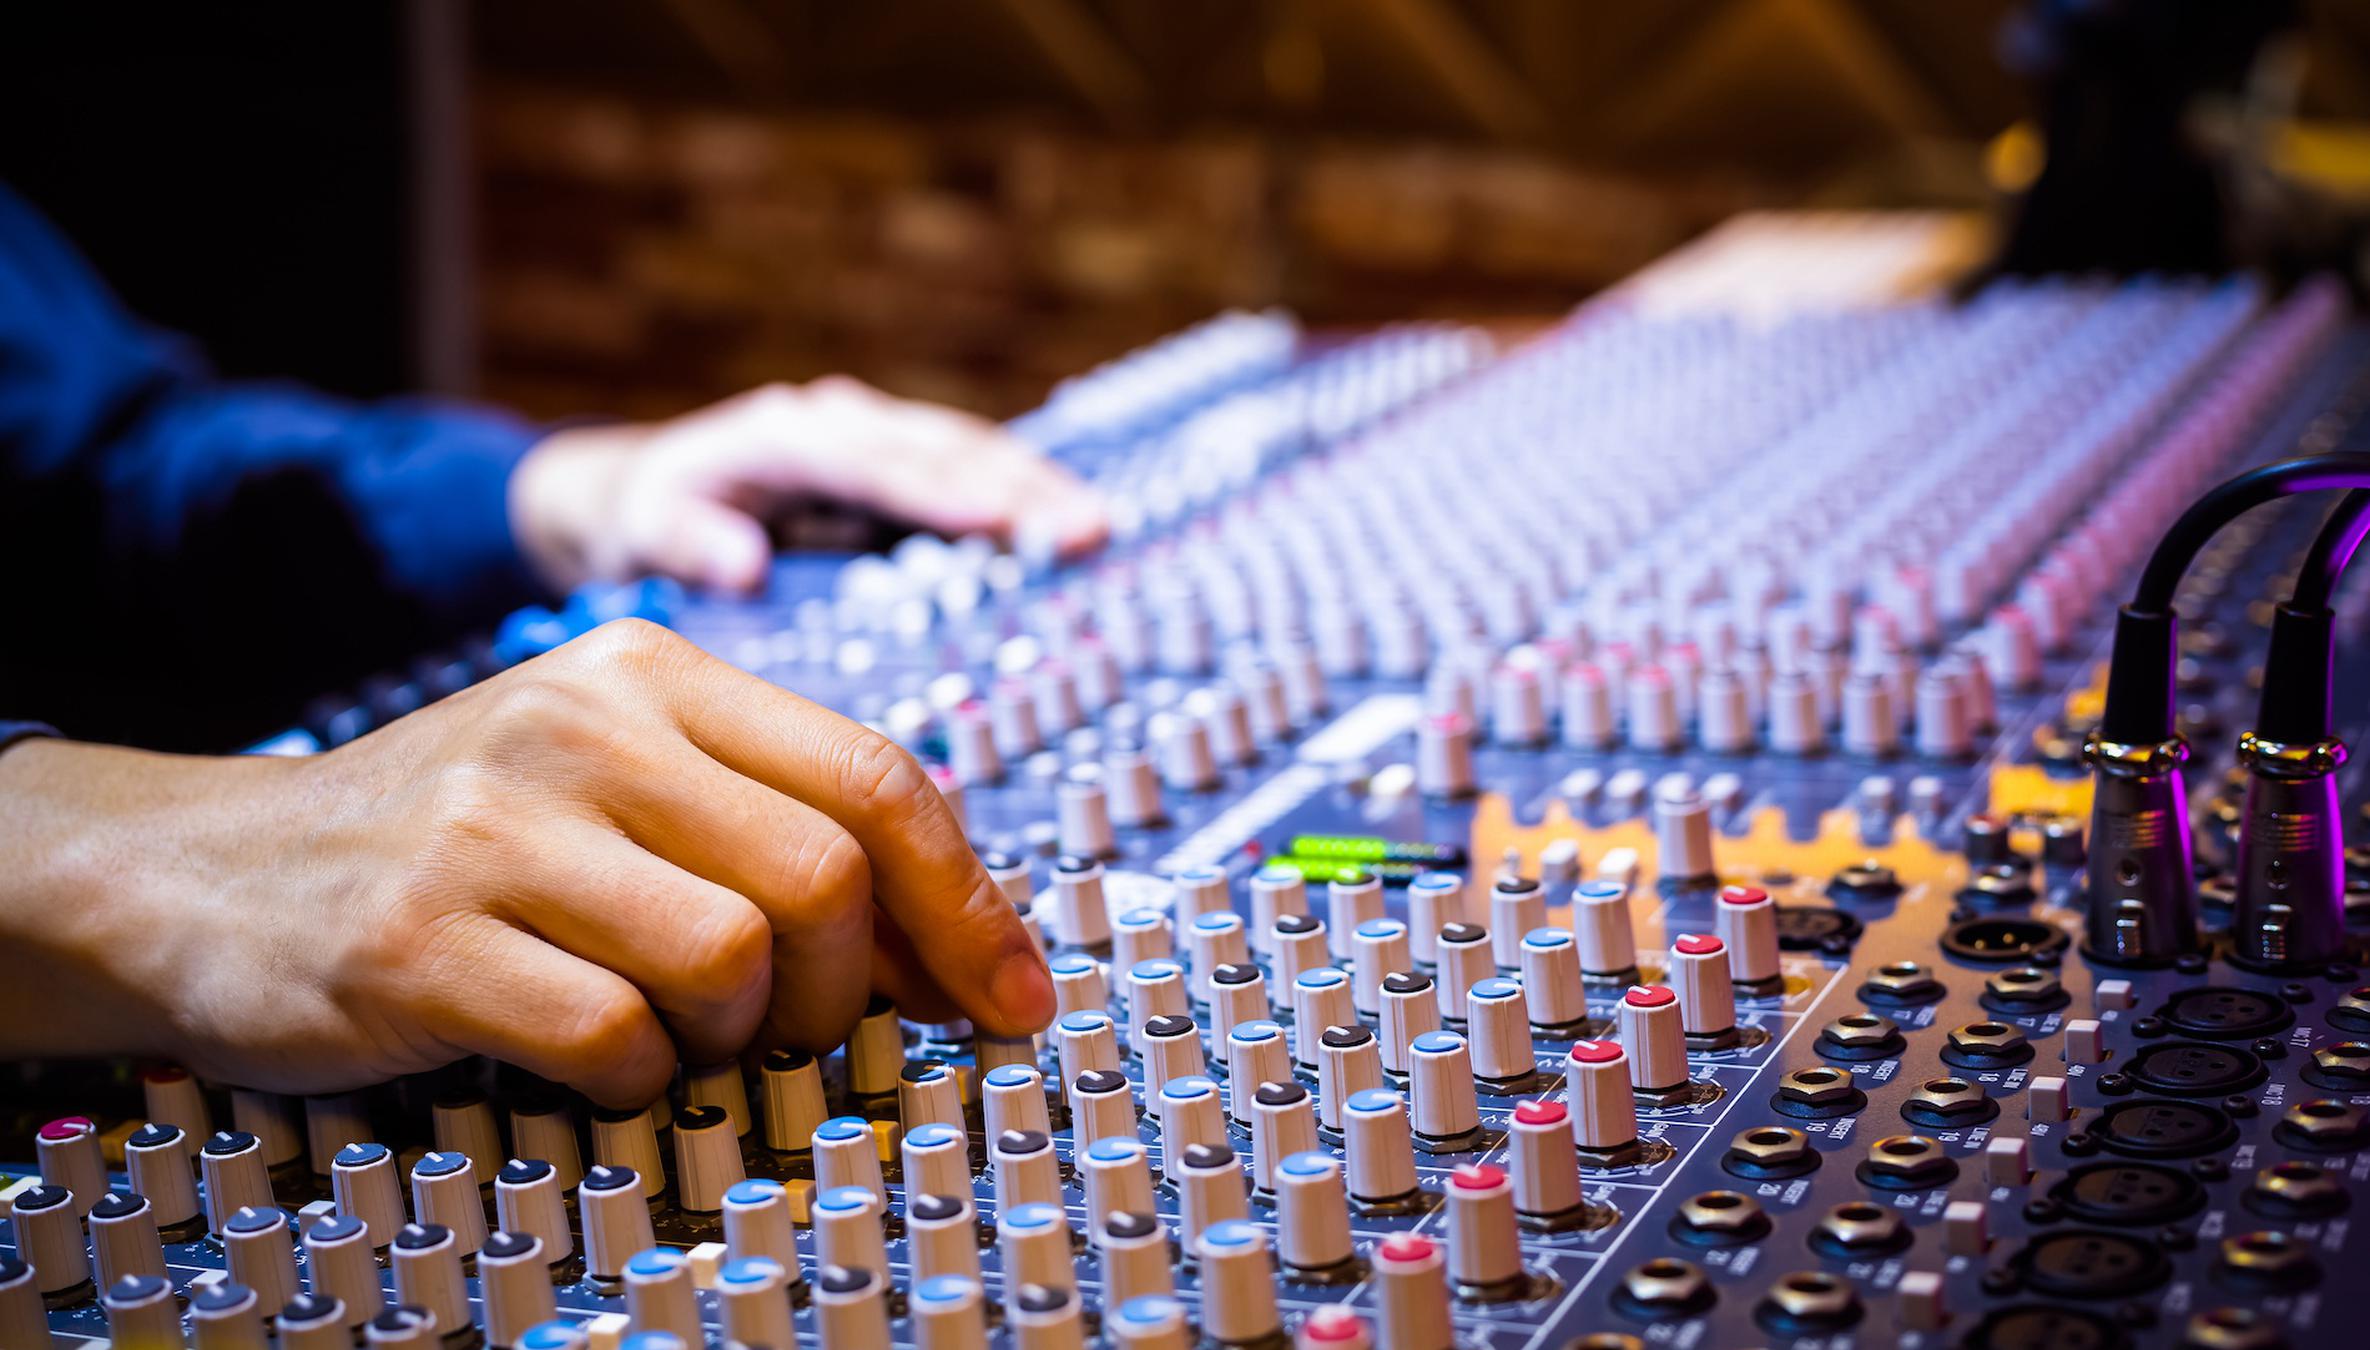 How To Write A Resume For A Sound Engineer